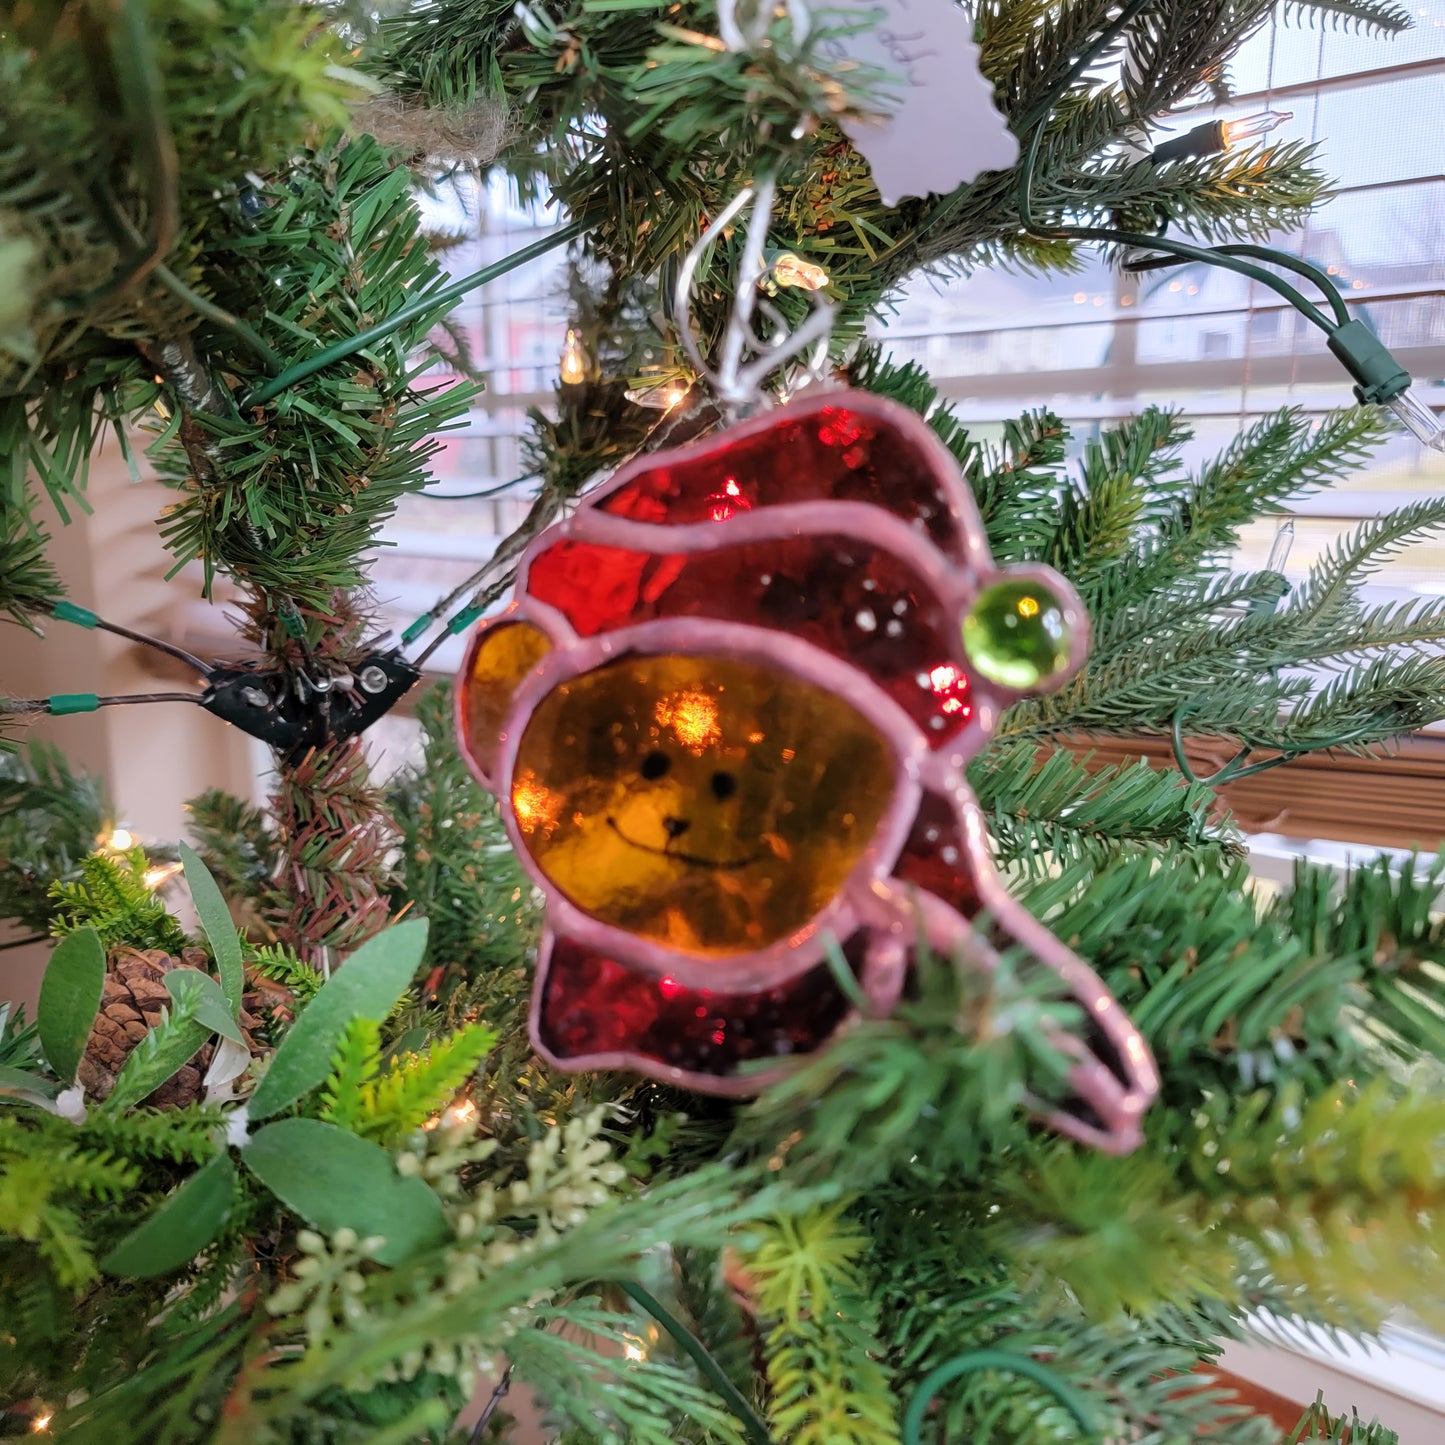 Stained Glass Christmas Ornaments - Handmade